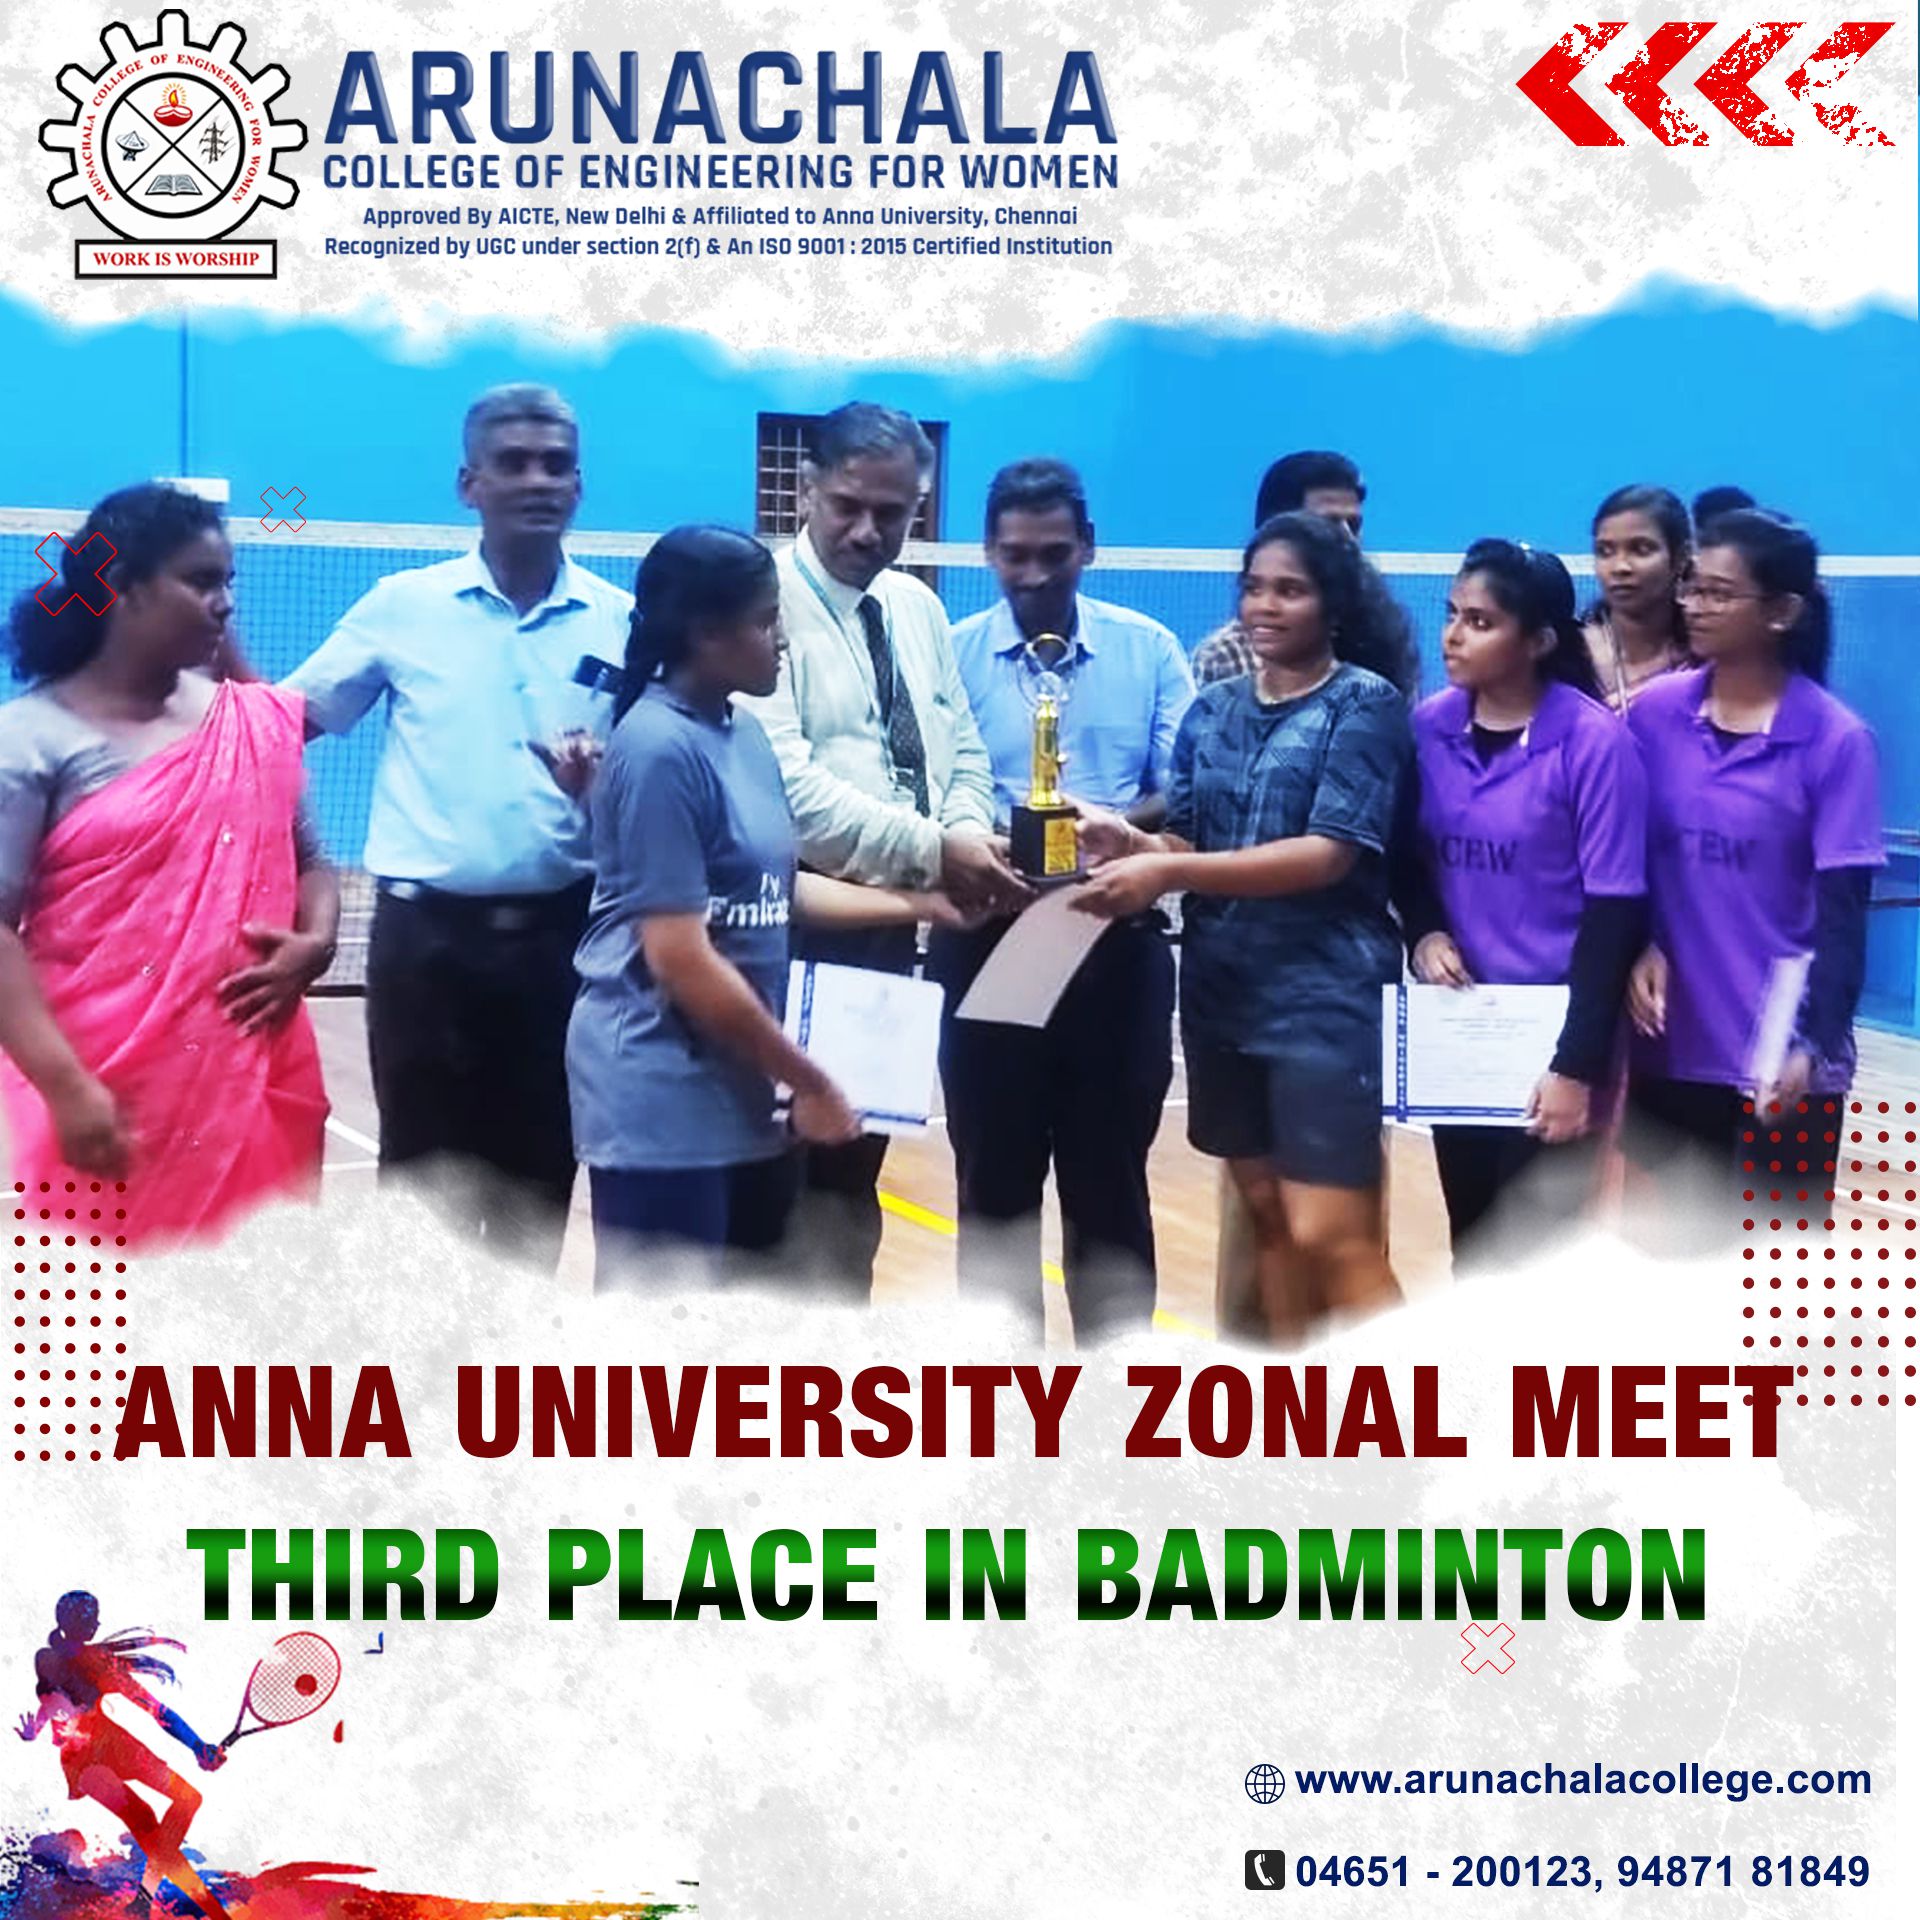 Congratulation on winning the achieving 3rd Place in Badminton in Anna University 19th Zonal meet.